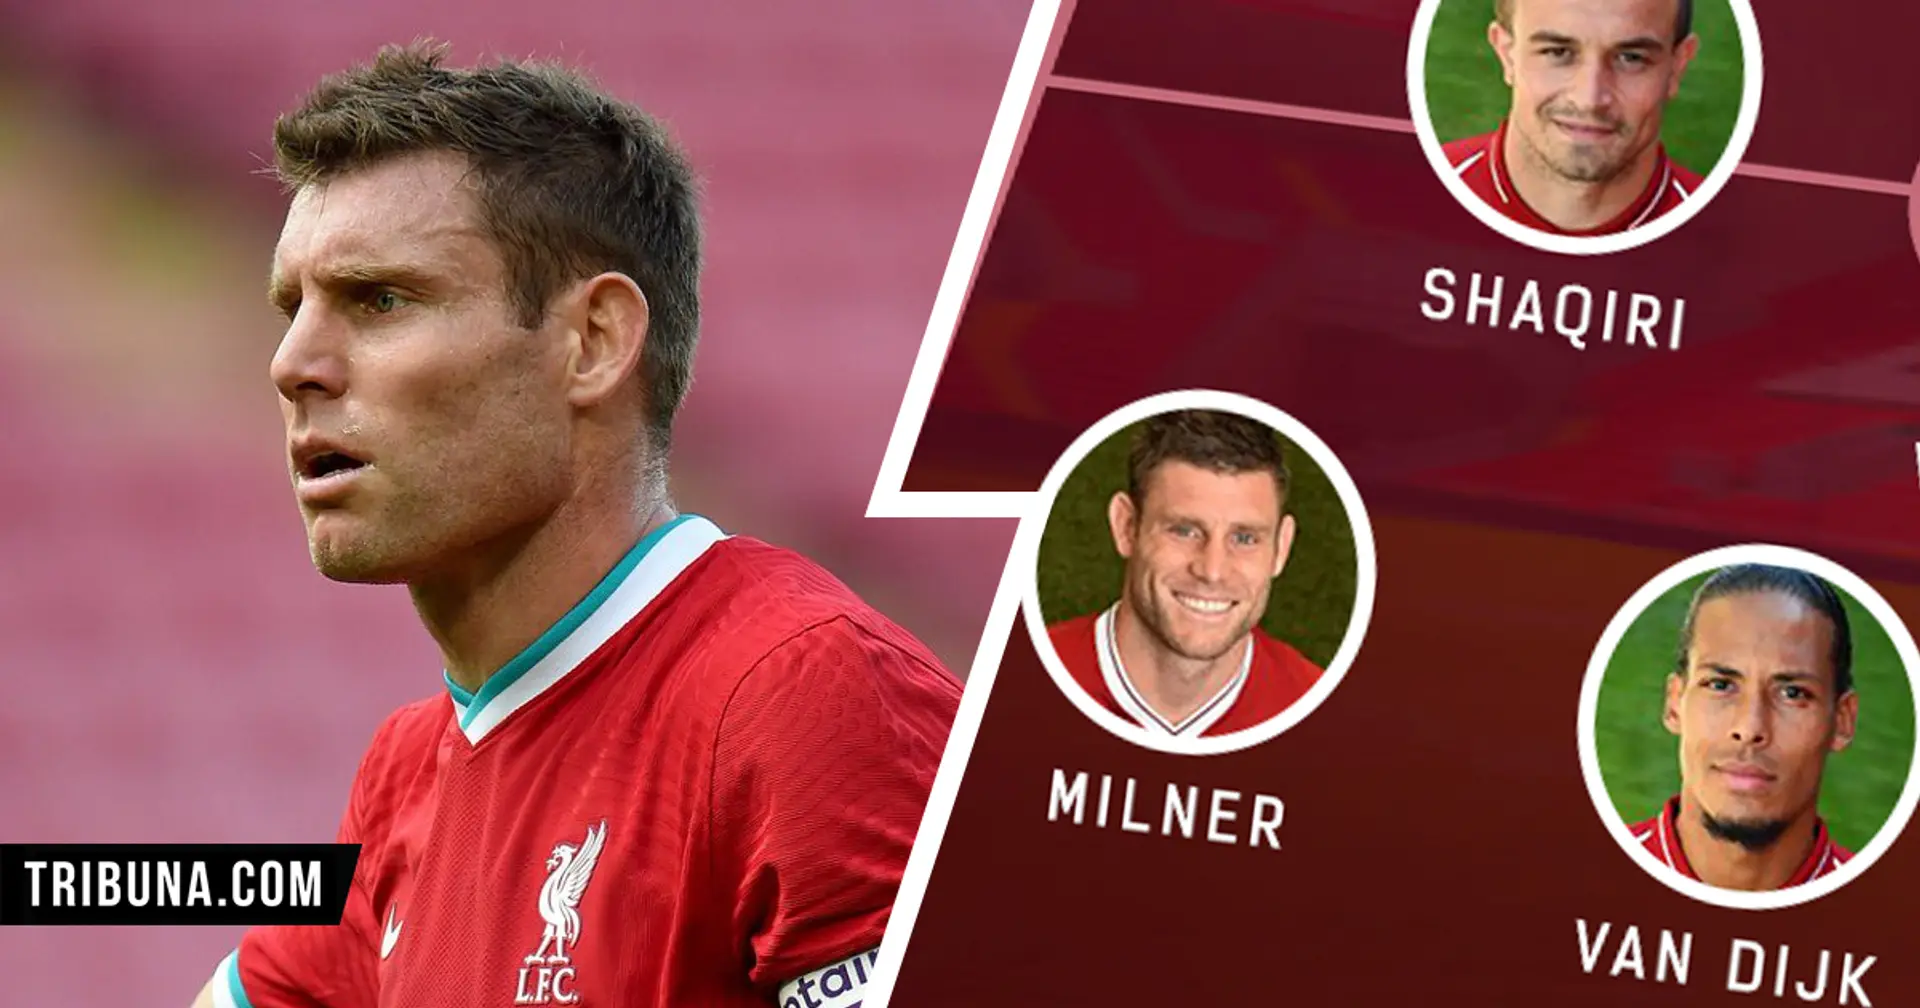 Milner to return to left-back? Select your favourite Liverpool XI vs Arsenal from 2 options!